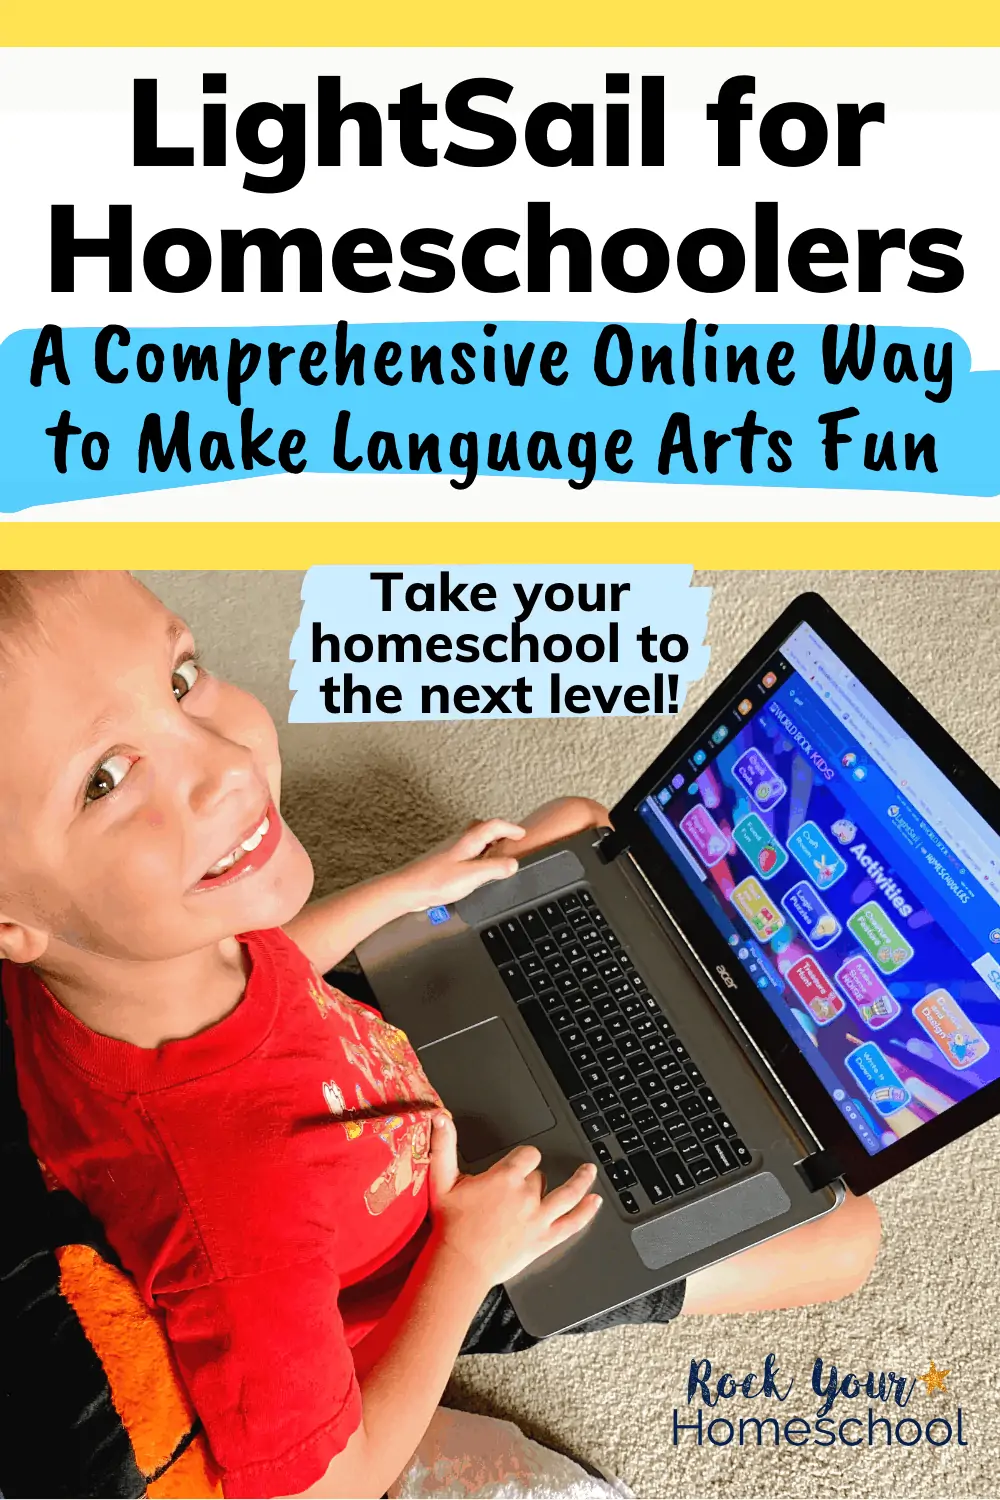 LightSail for Homeschoolers: A Comprehensive Online Way to Make Language Arts Fun